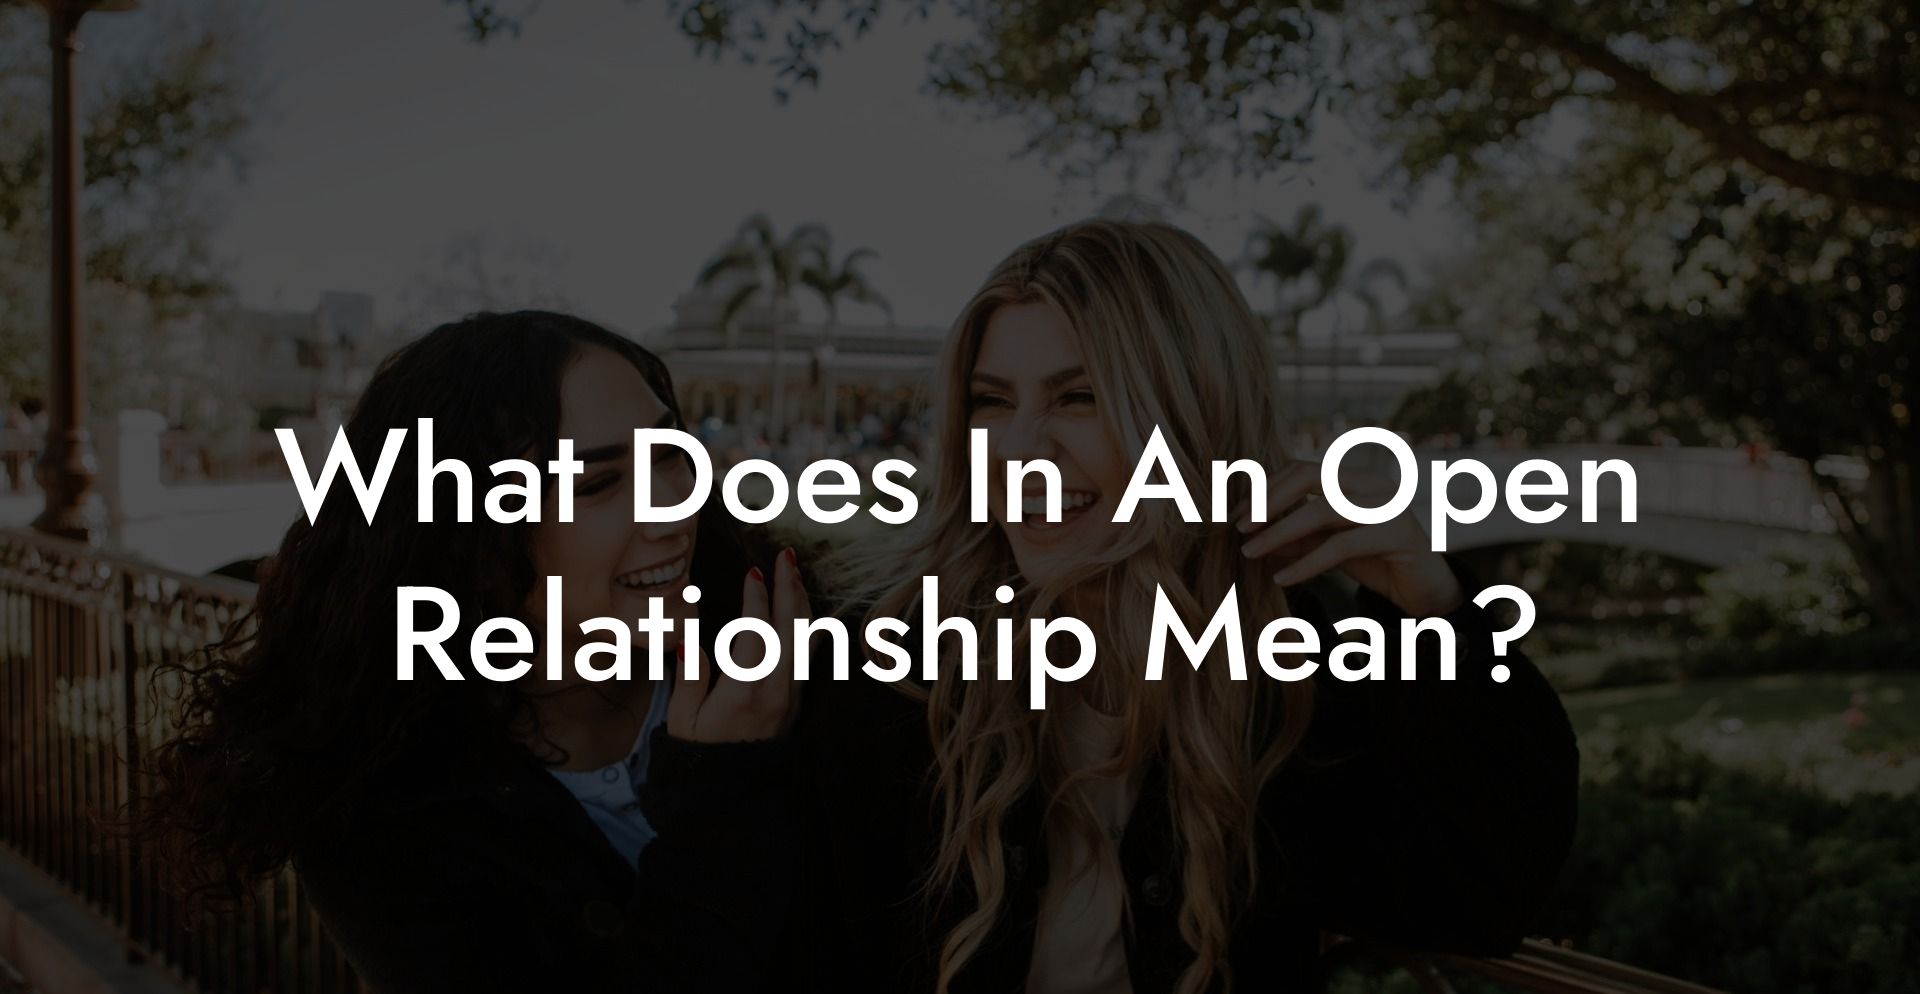 What Does In An Open Relationship Mean?